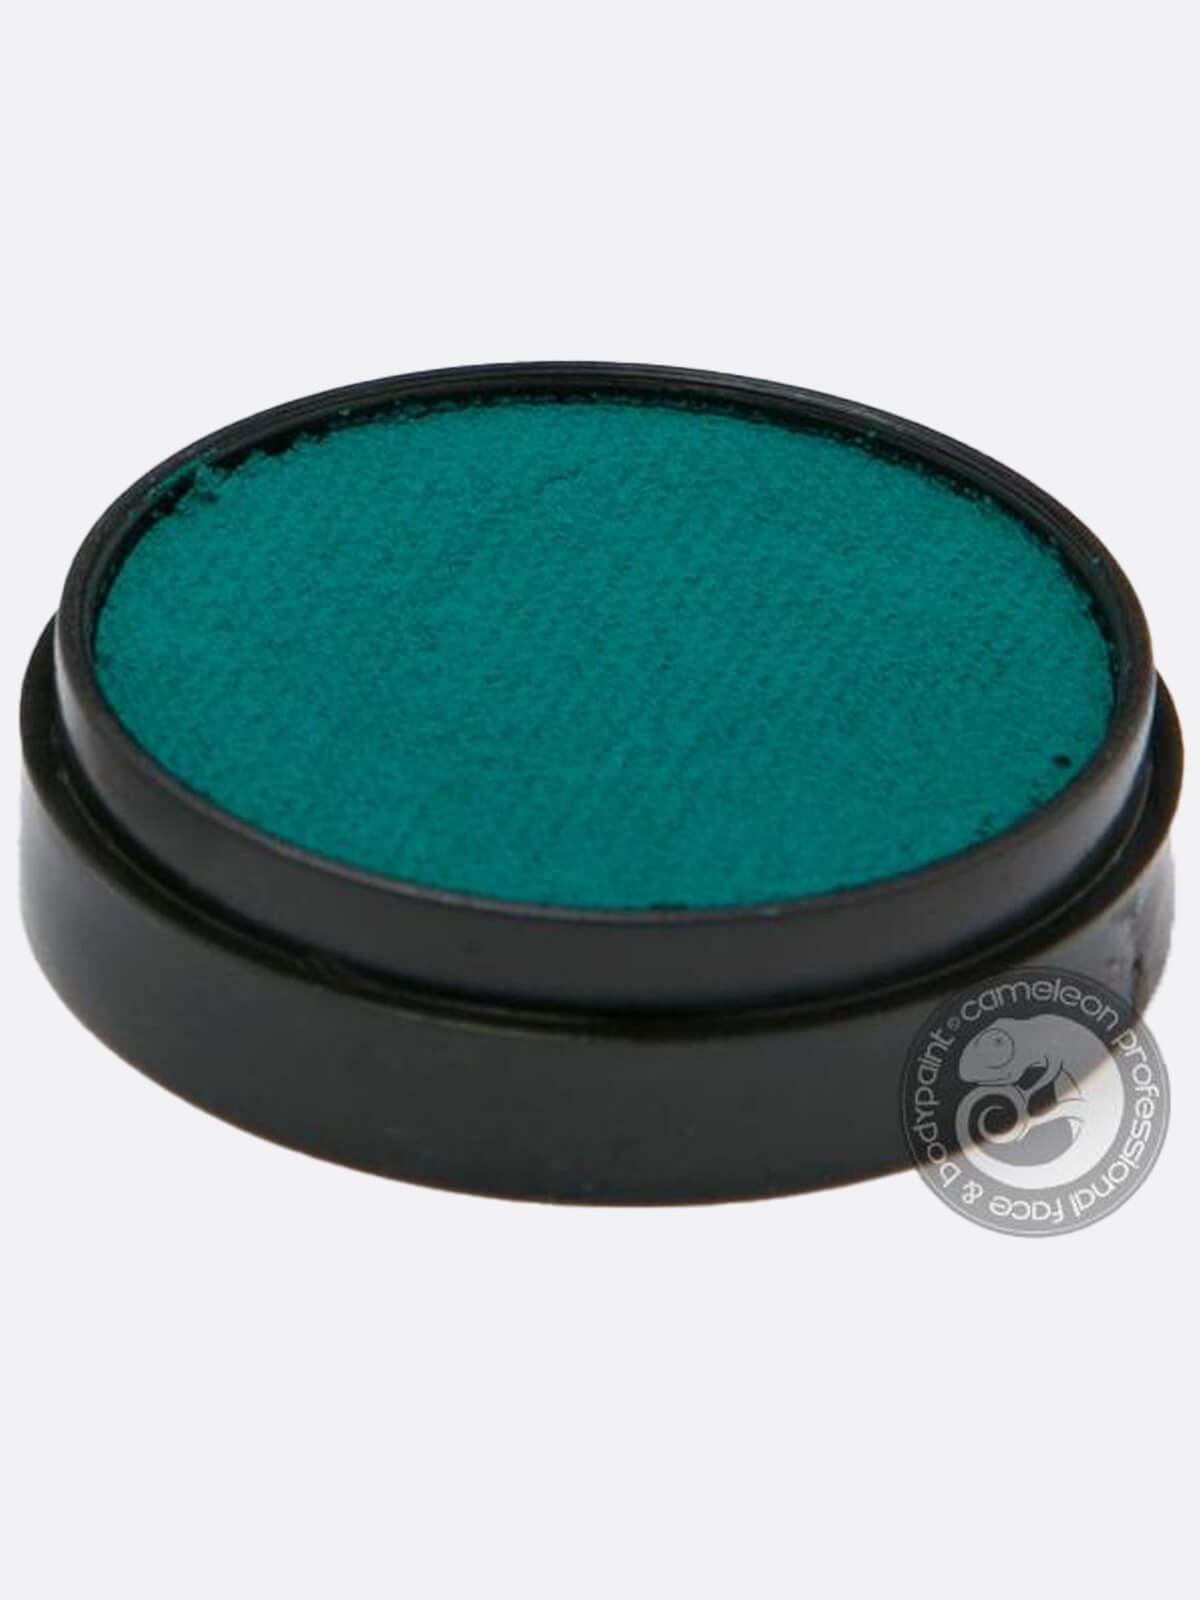 Teal Face Paint by Cameleon